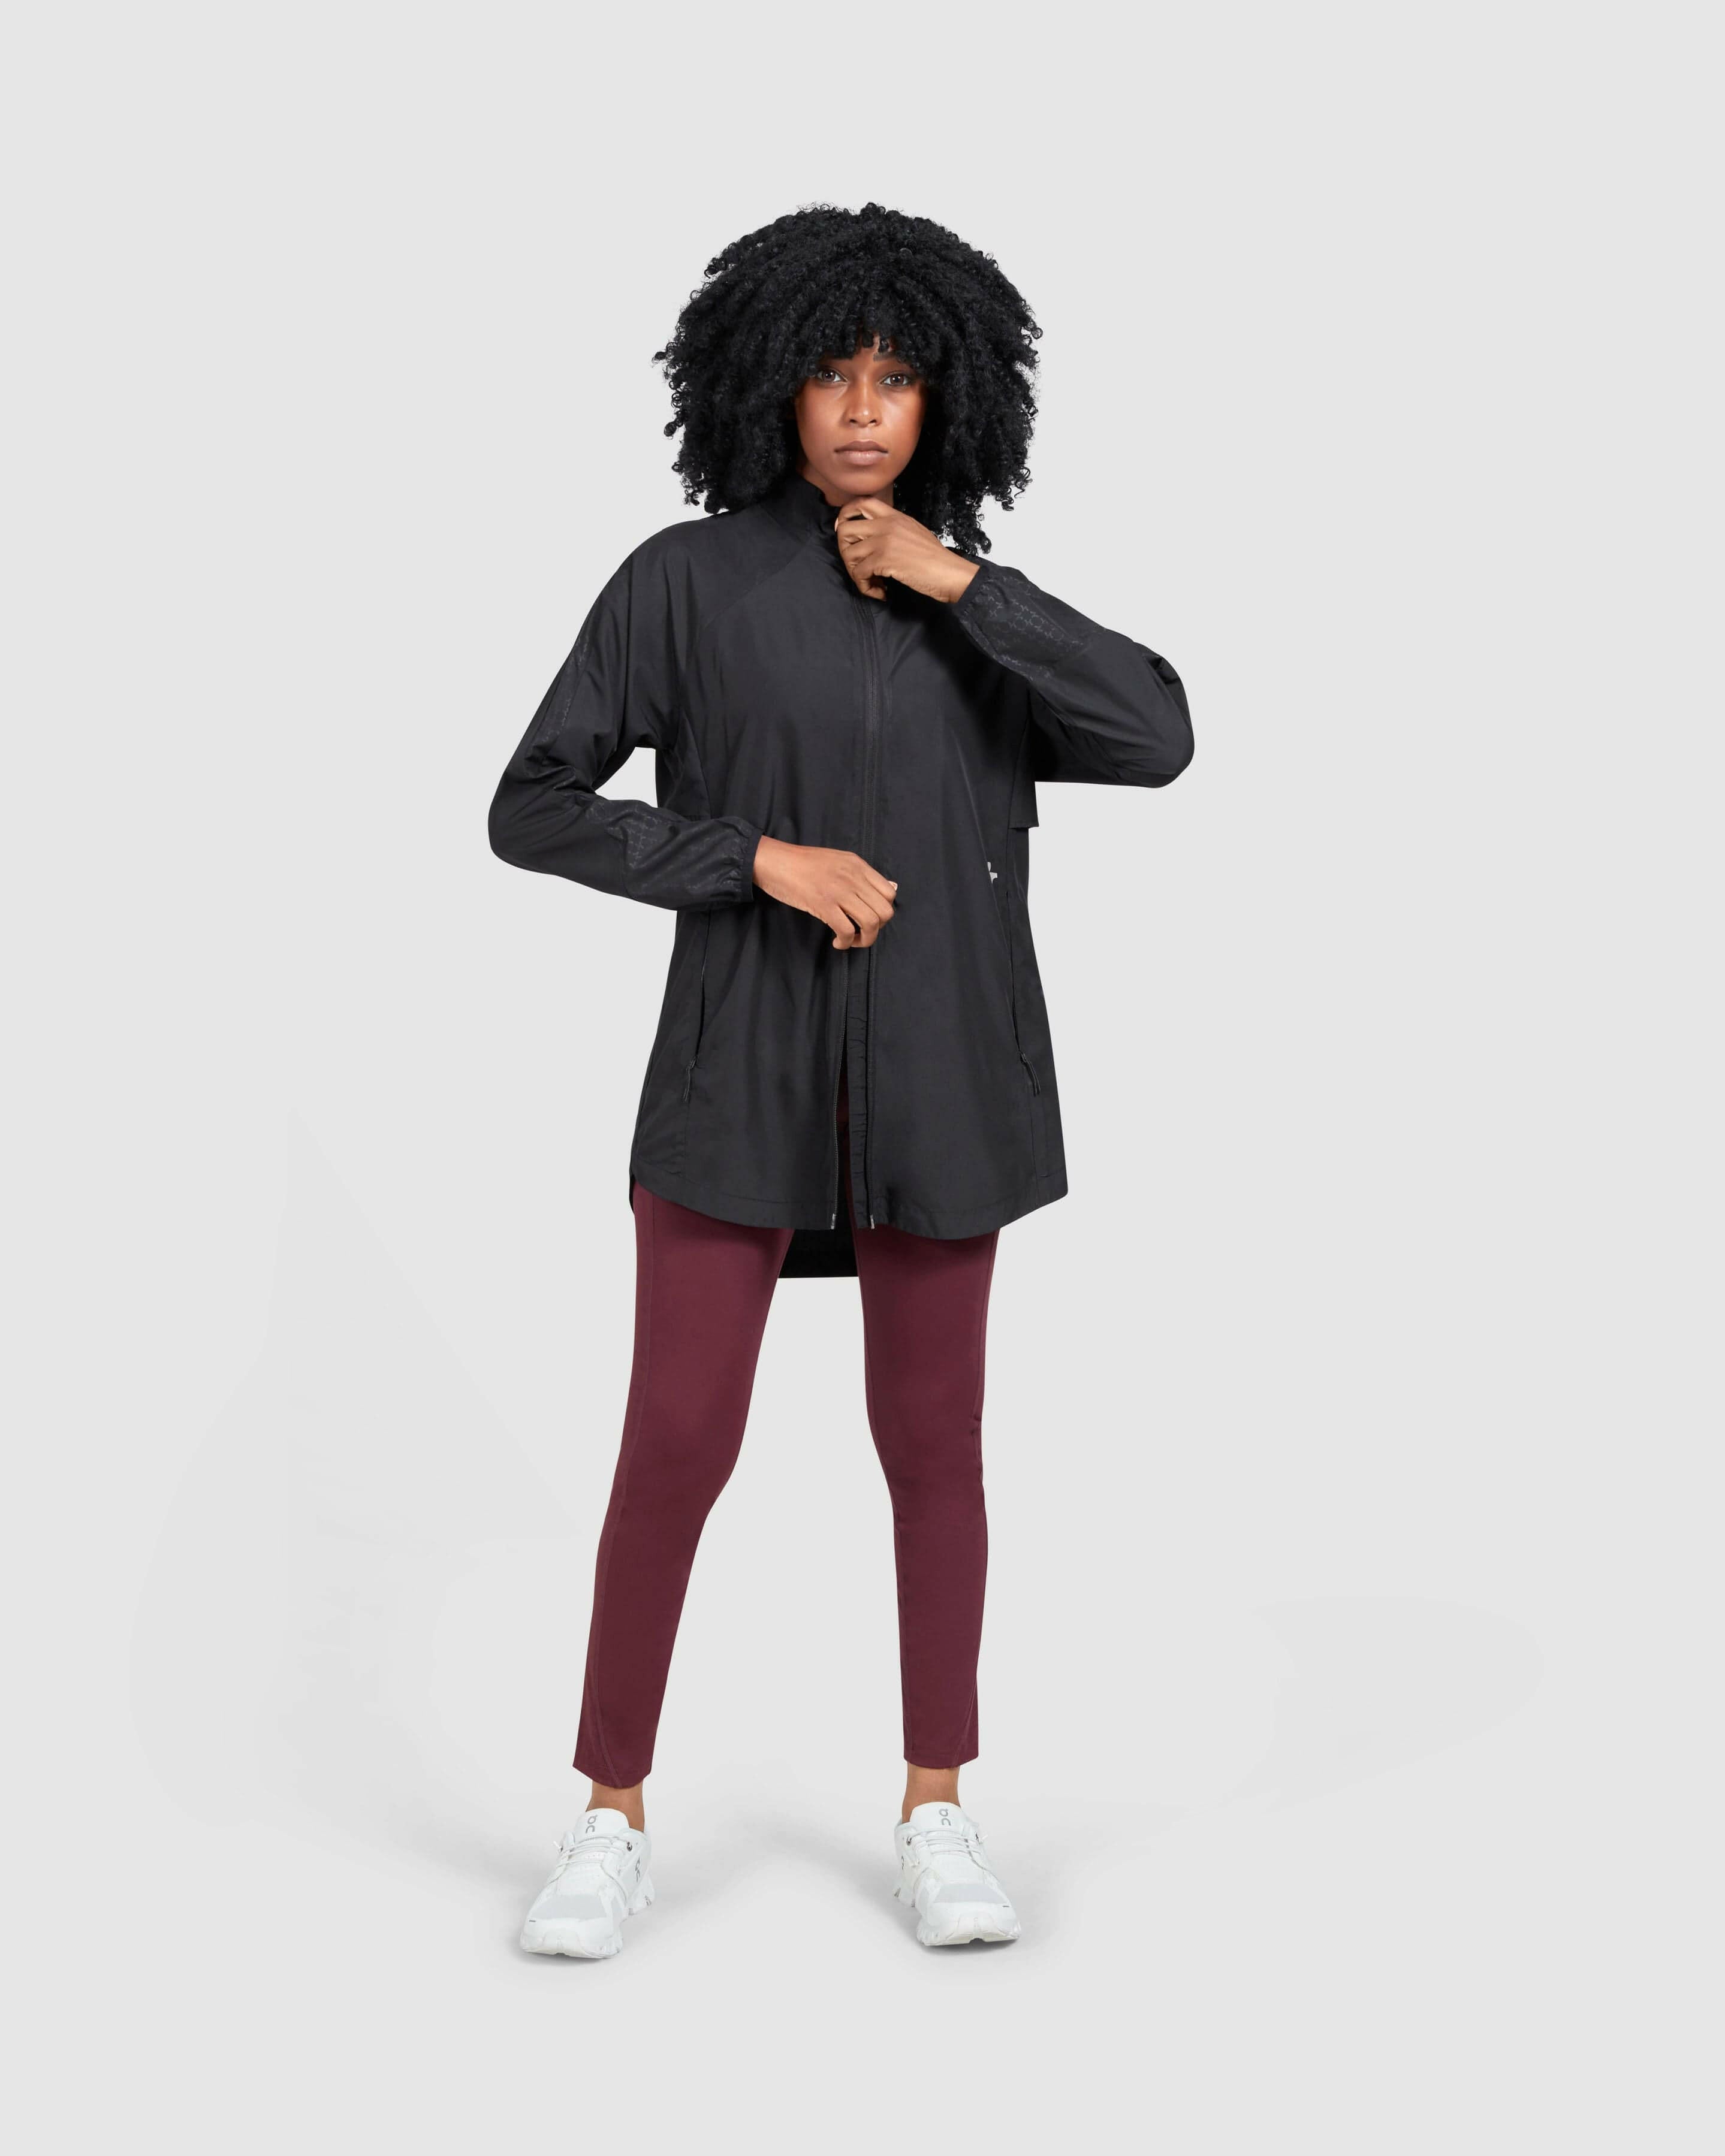 A confident model in a black FLY JACKET by Qynda made of super light fabric with a hidden mesh back and both ways zipper and maroon leggings.